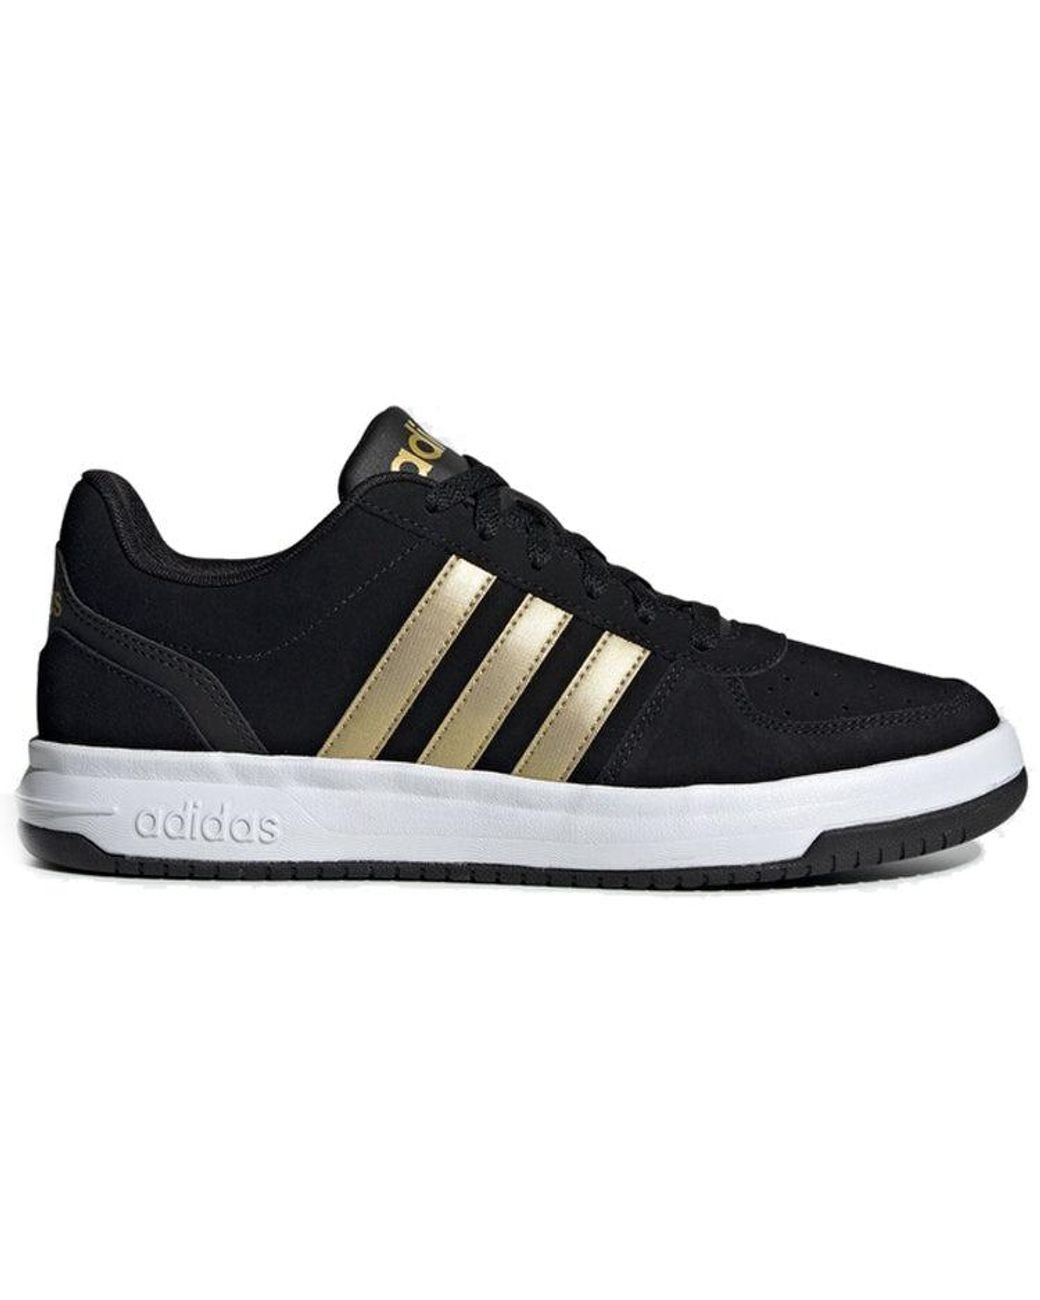 adidas Neo Cut Cozy Breathable Low Tops Casual Skateboarding Shoes Black  for Men | Lyst